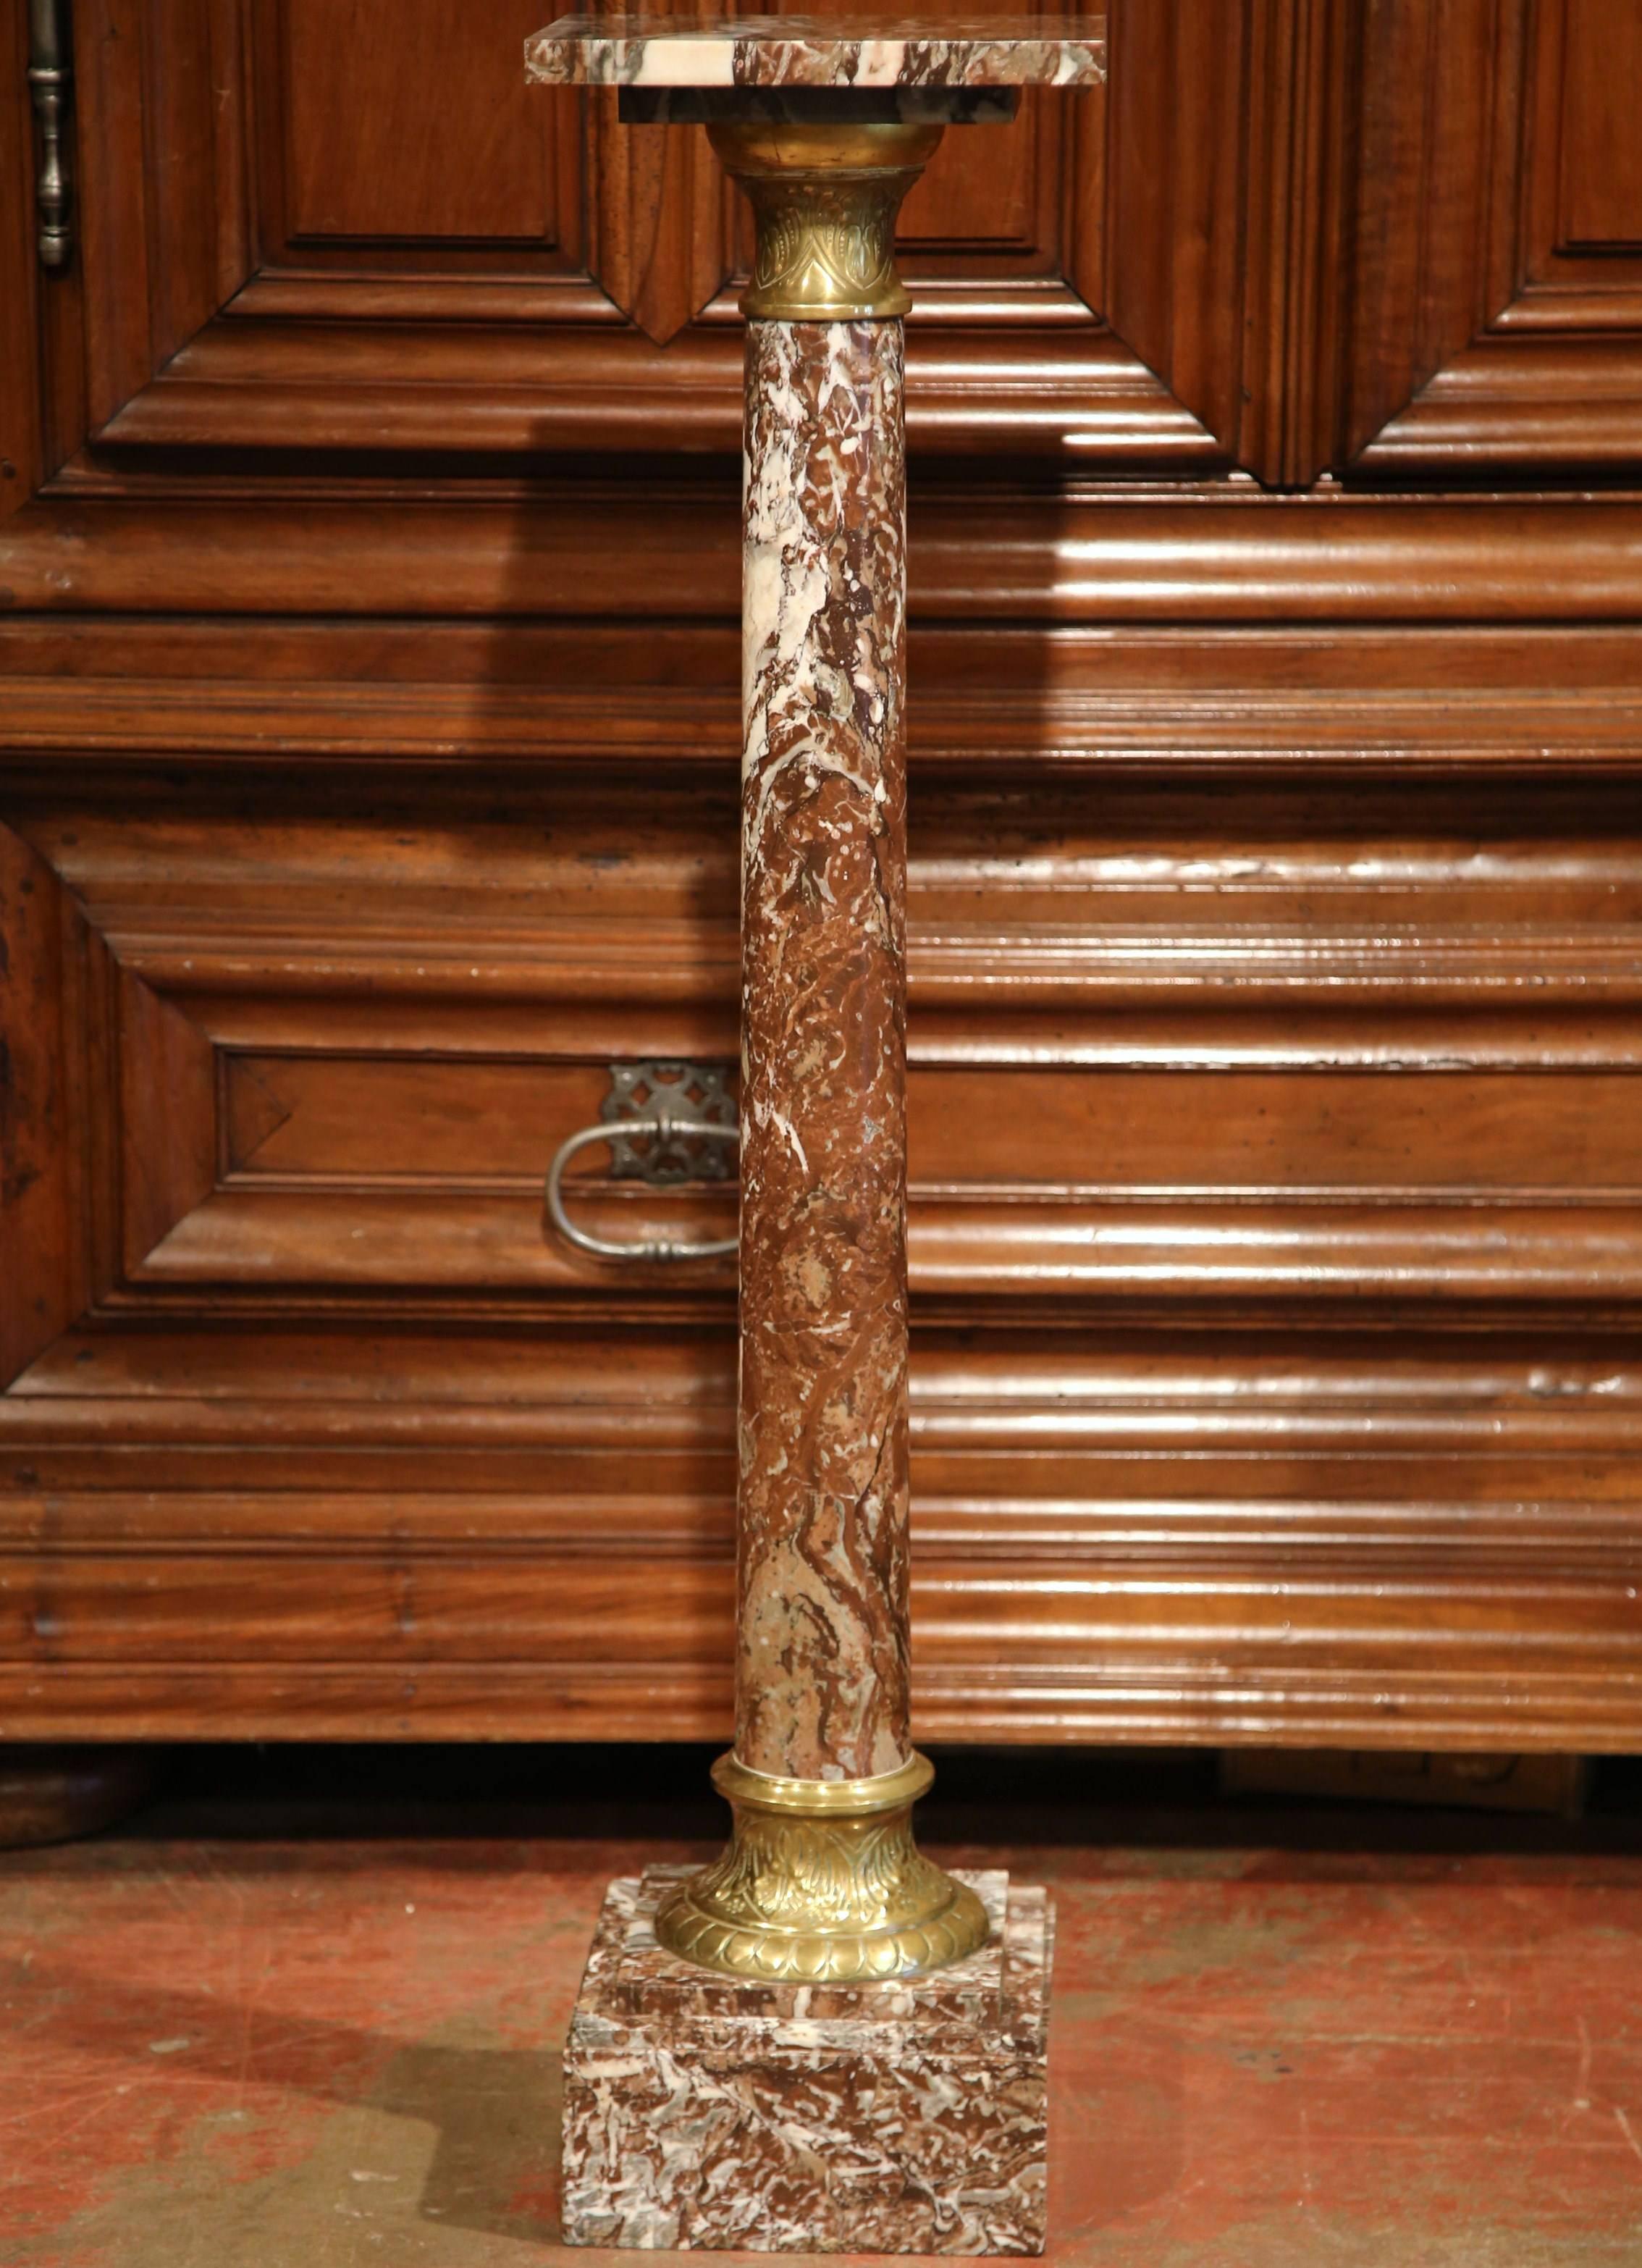 This elegant antique red marble pedestal was crafted in France, circa 1870. The pedestal sits on a sturdy square base with a repousse brass ring at the bottom, and features a tall round stem embellished by ornate brass mounts at the neck. It is